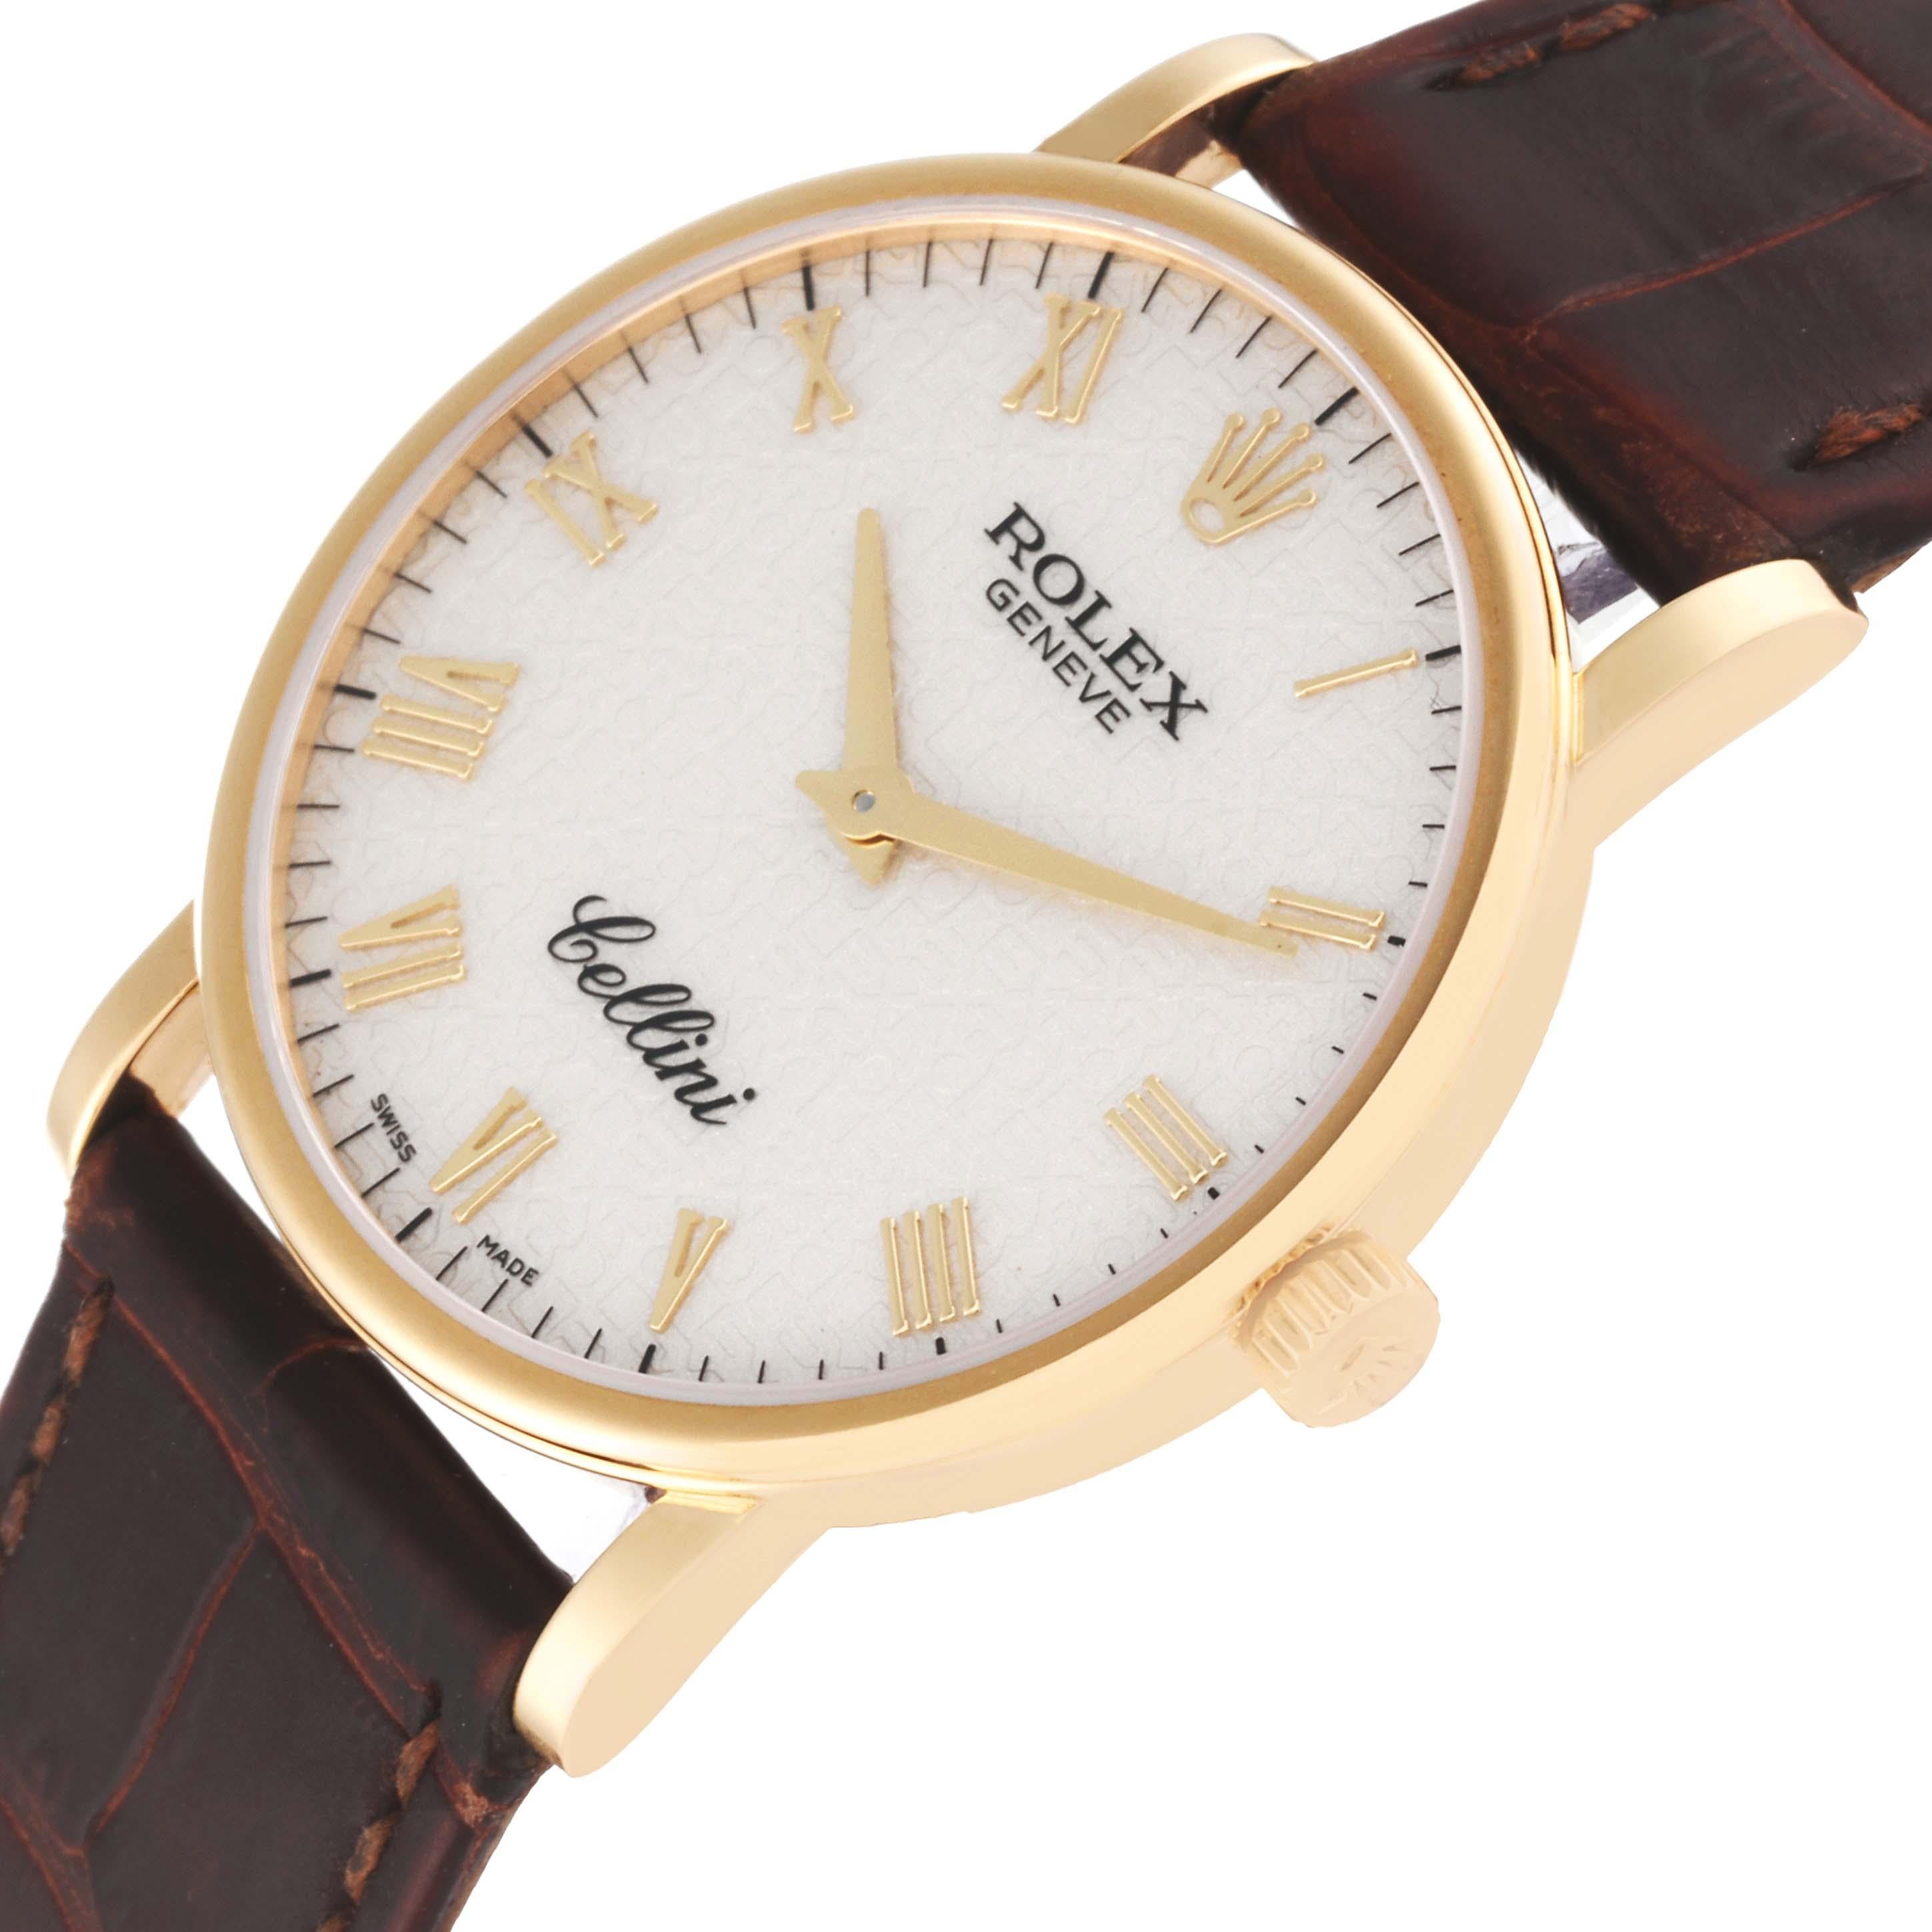 Men's Rolex Cellini Classic Yellow Gold Ivory Anniversary Dial Mens Watch 5115 Card